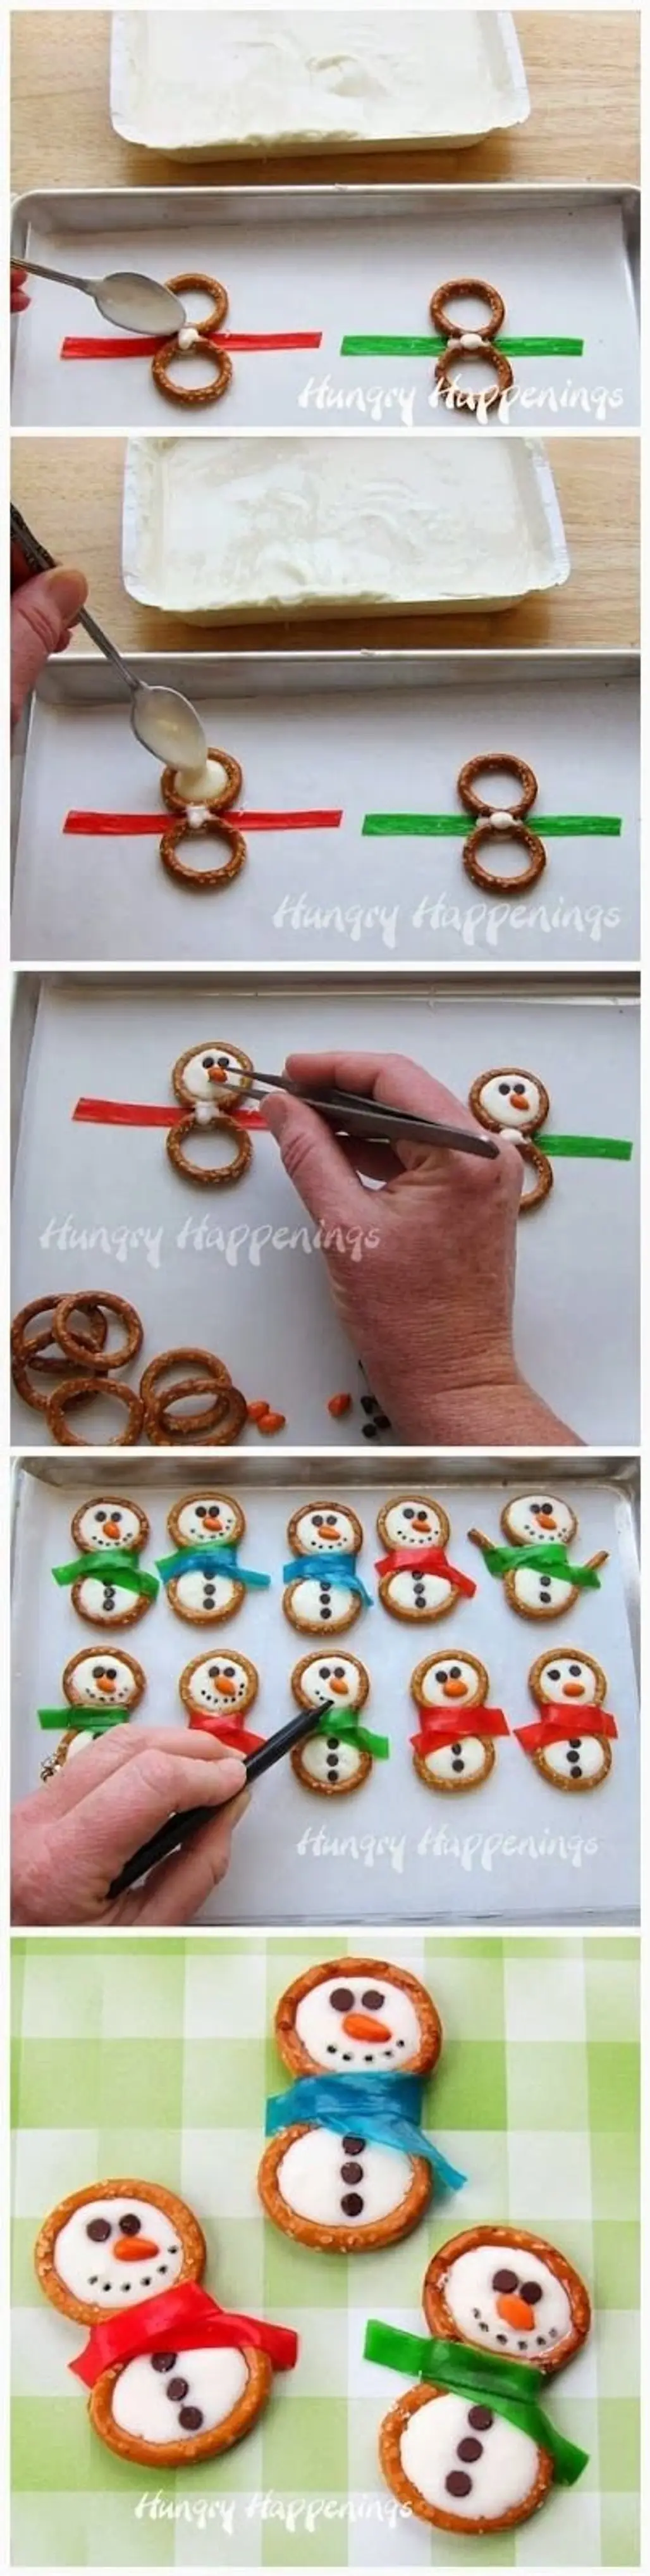 Cool Things off with These Friendly Snowmen Friends